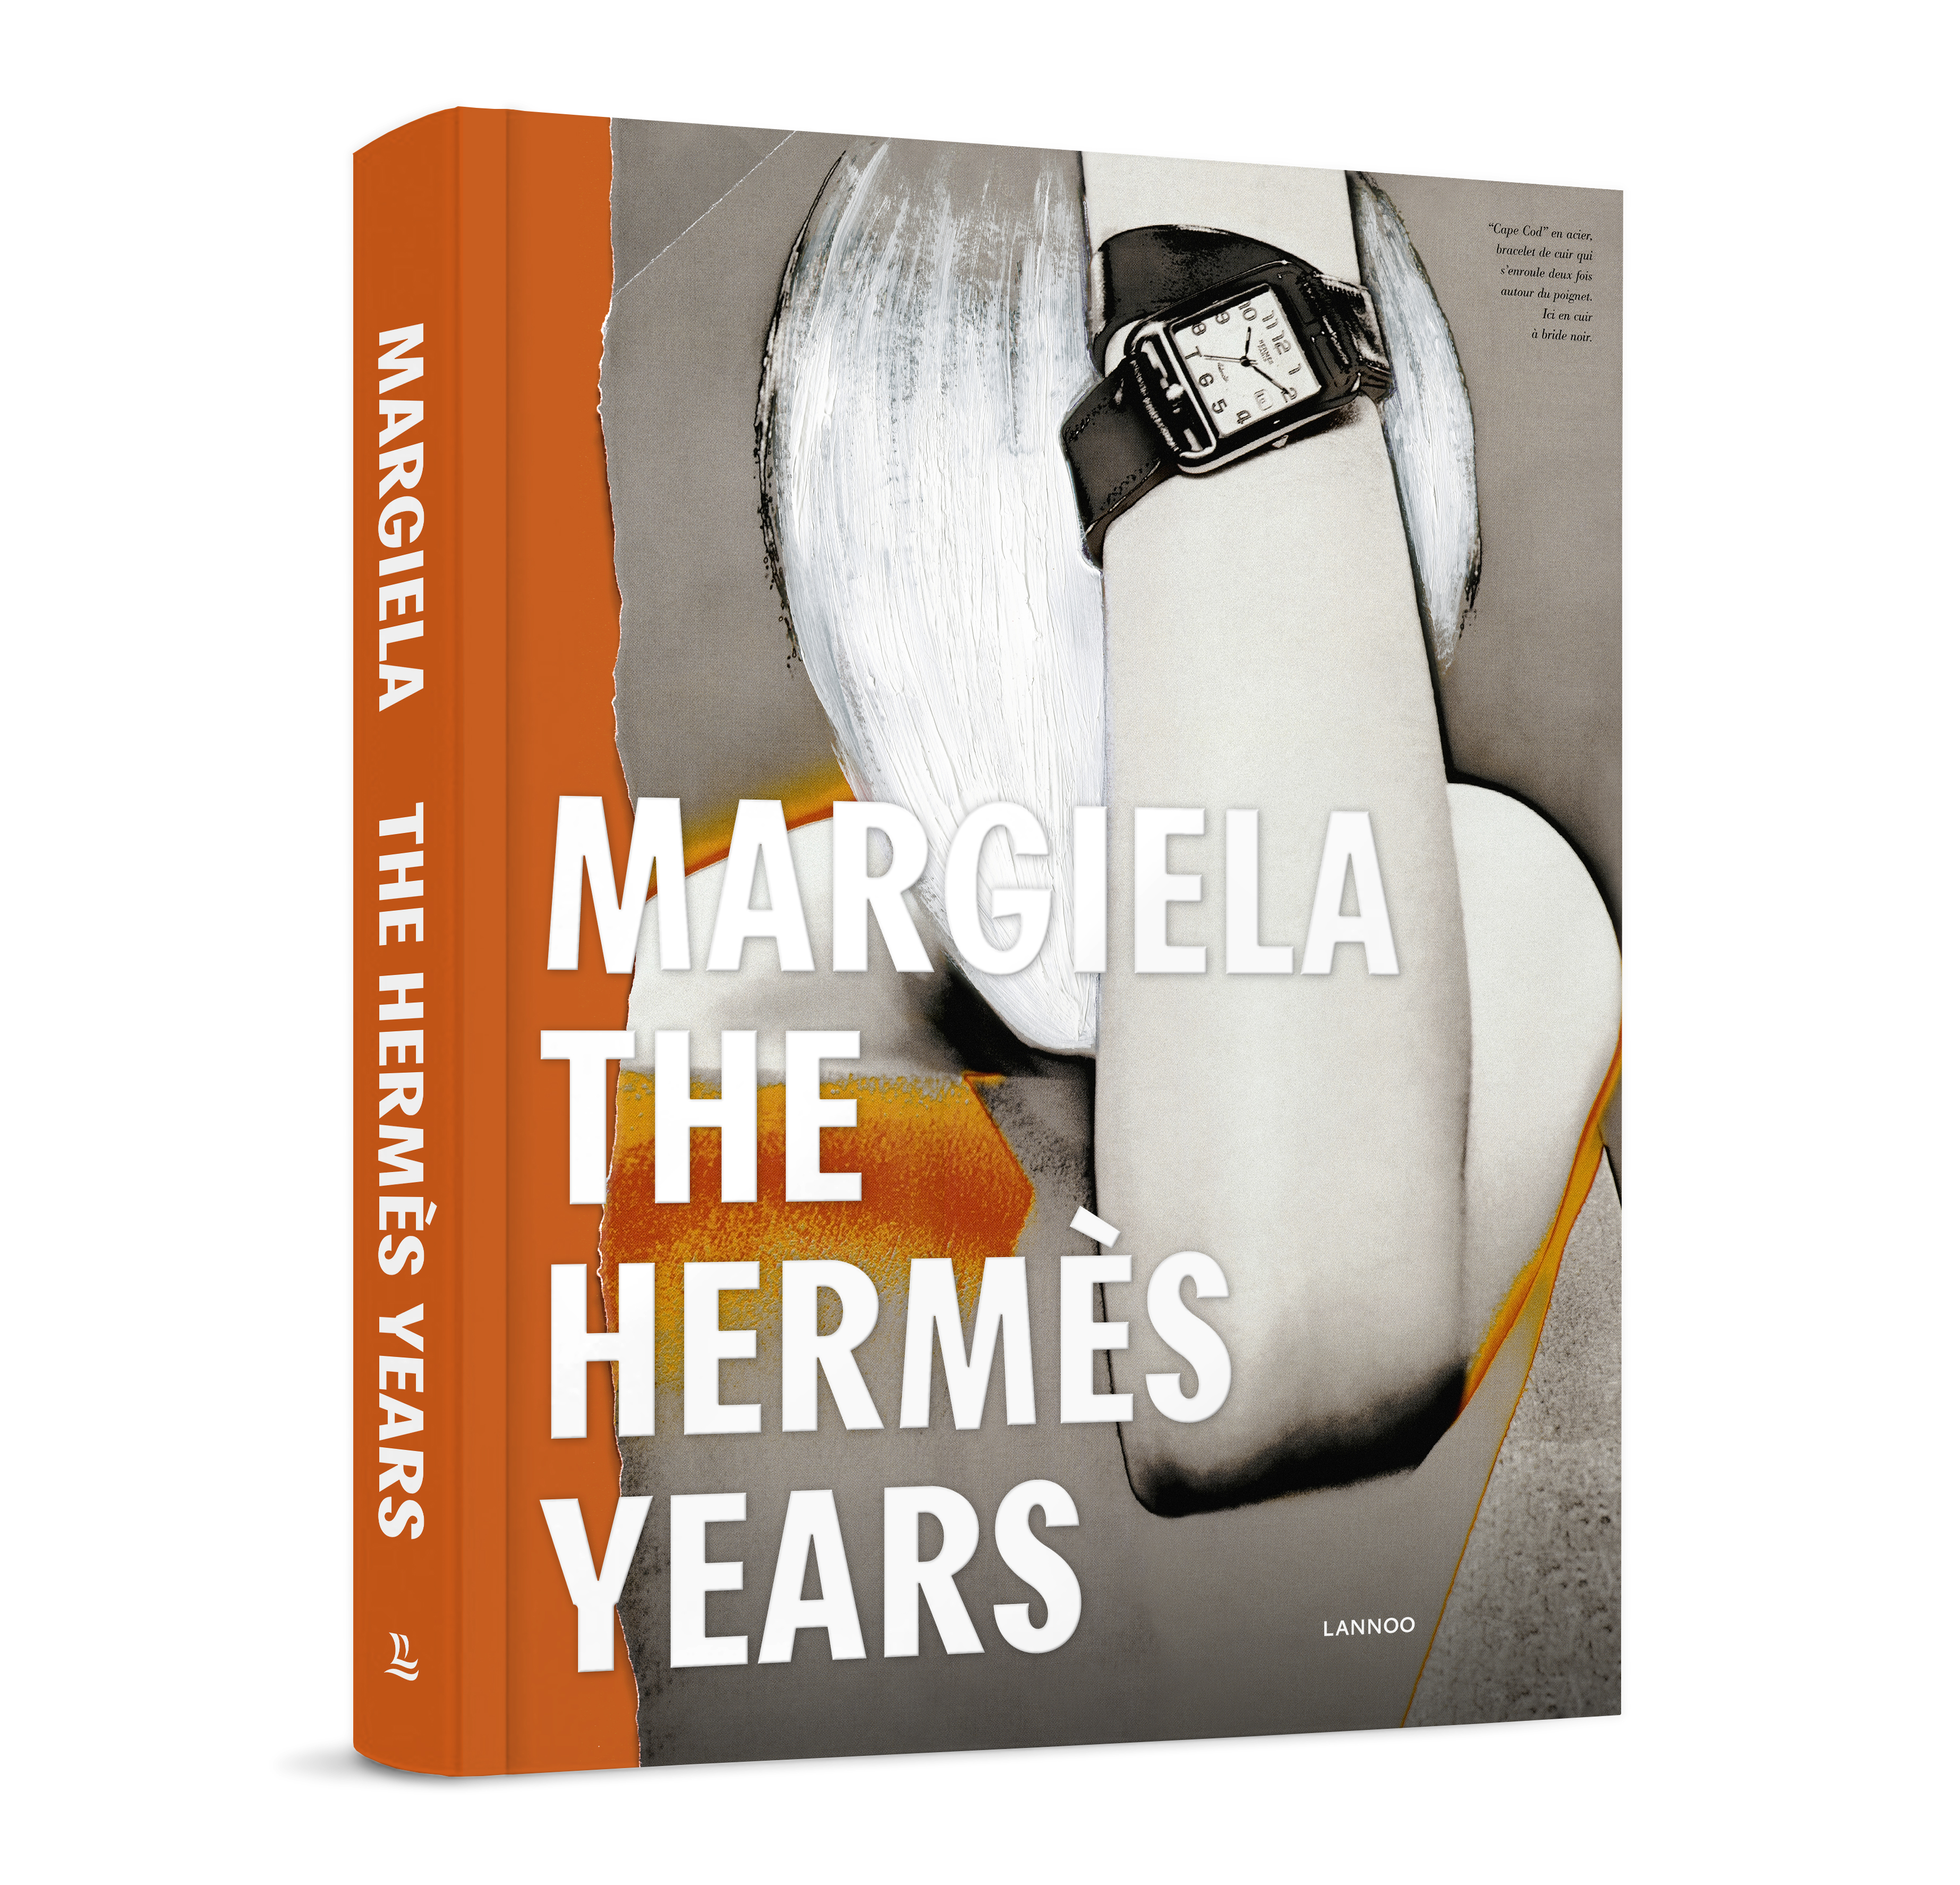 Martin Margiela Releases New Book on His Years at Hermès - Daily Front Row